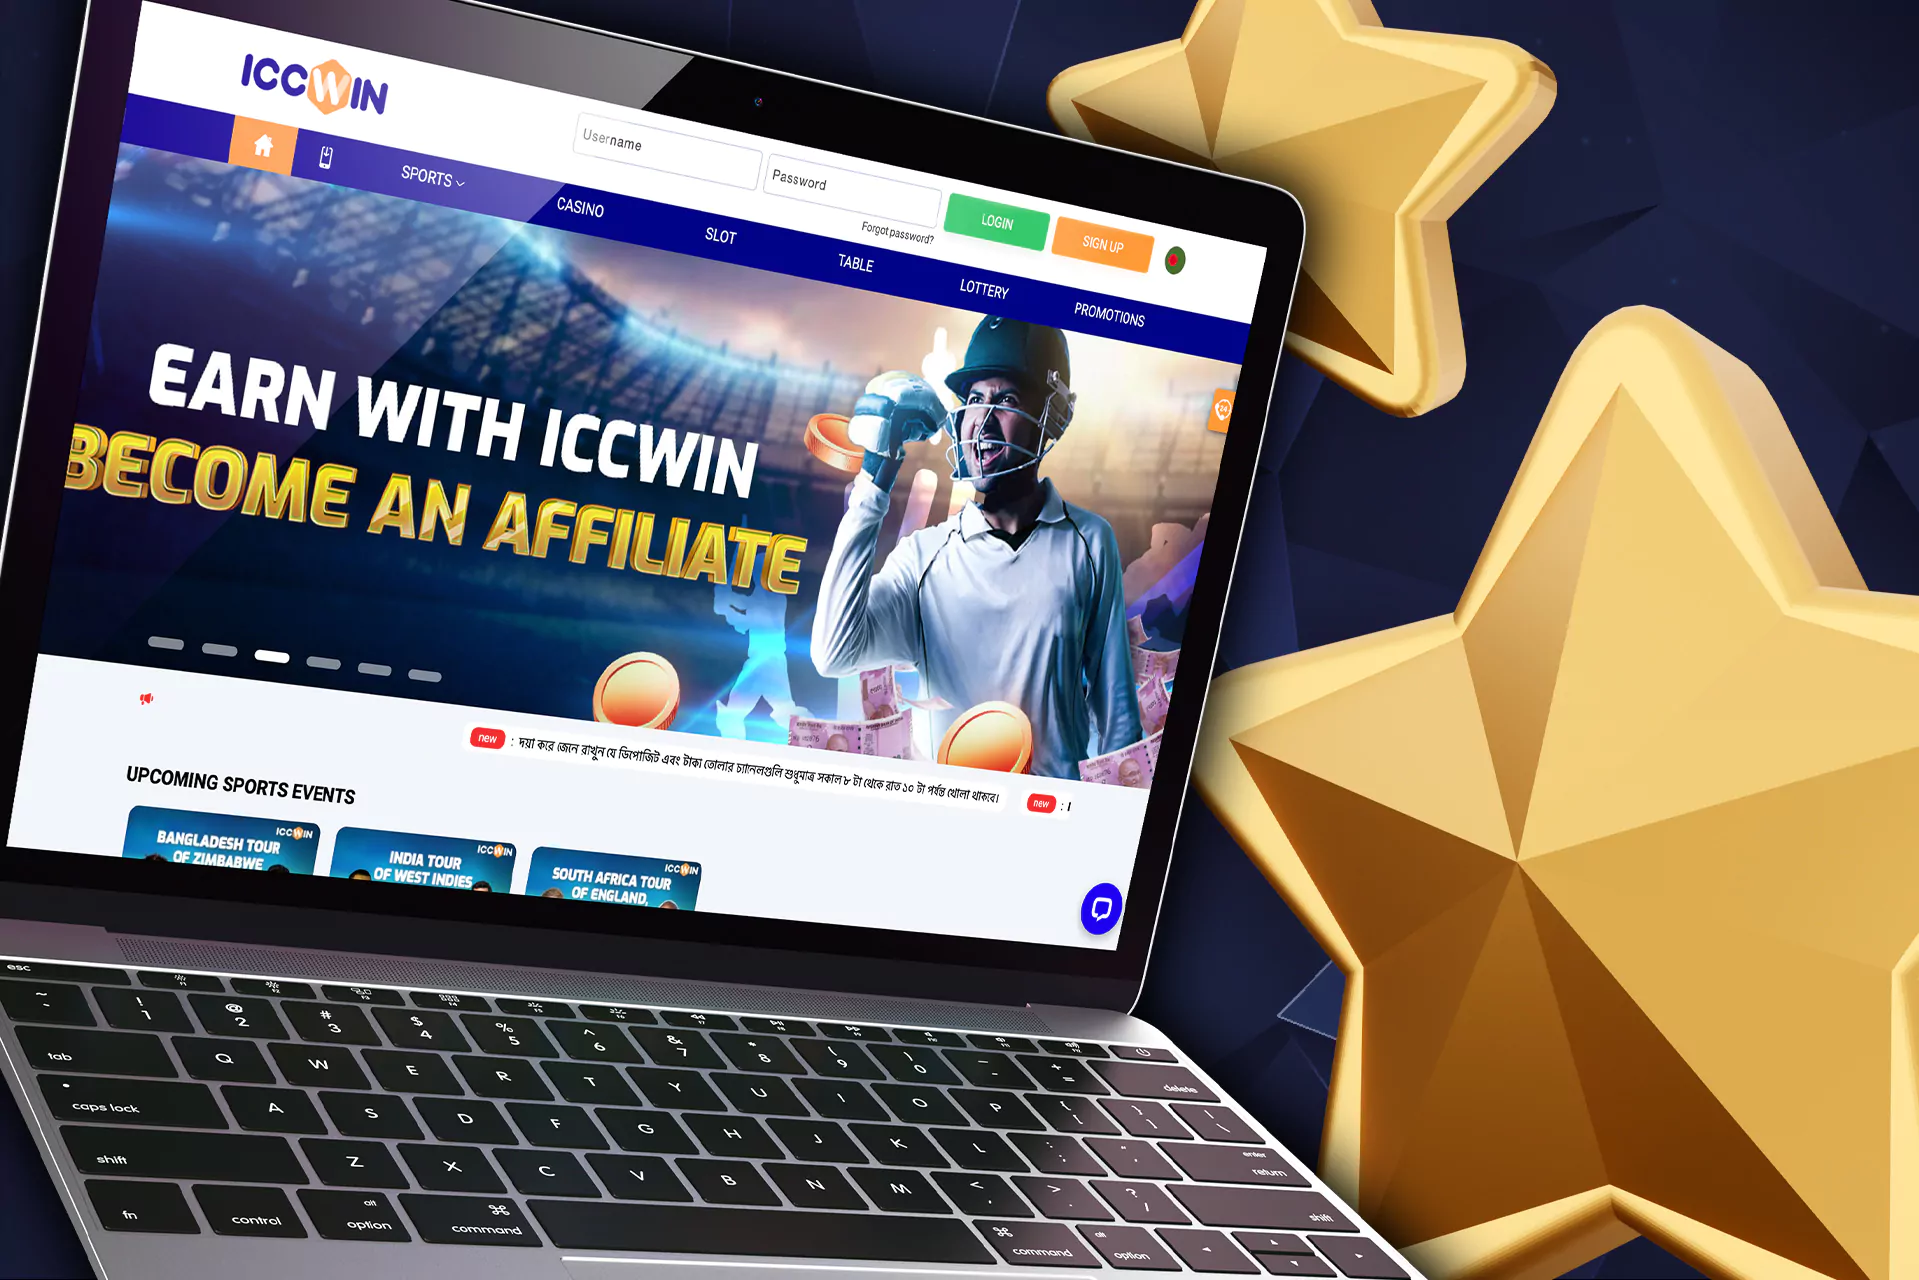 You wiil find sports betting and casino games in the ICCWIN company.